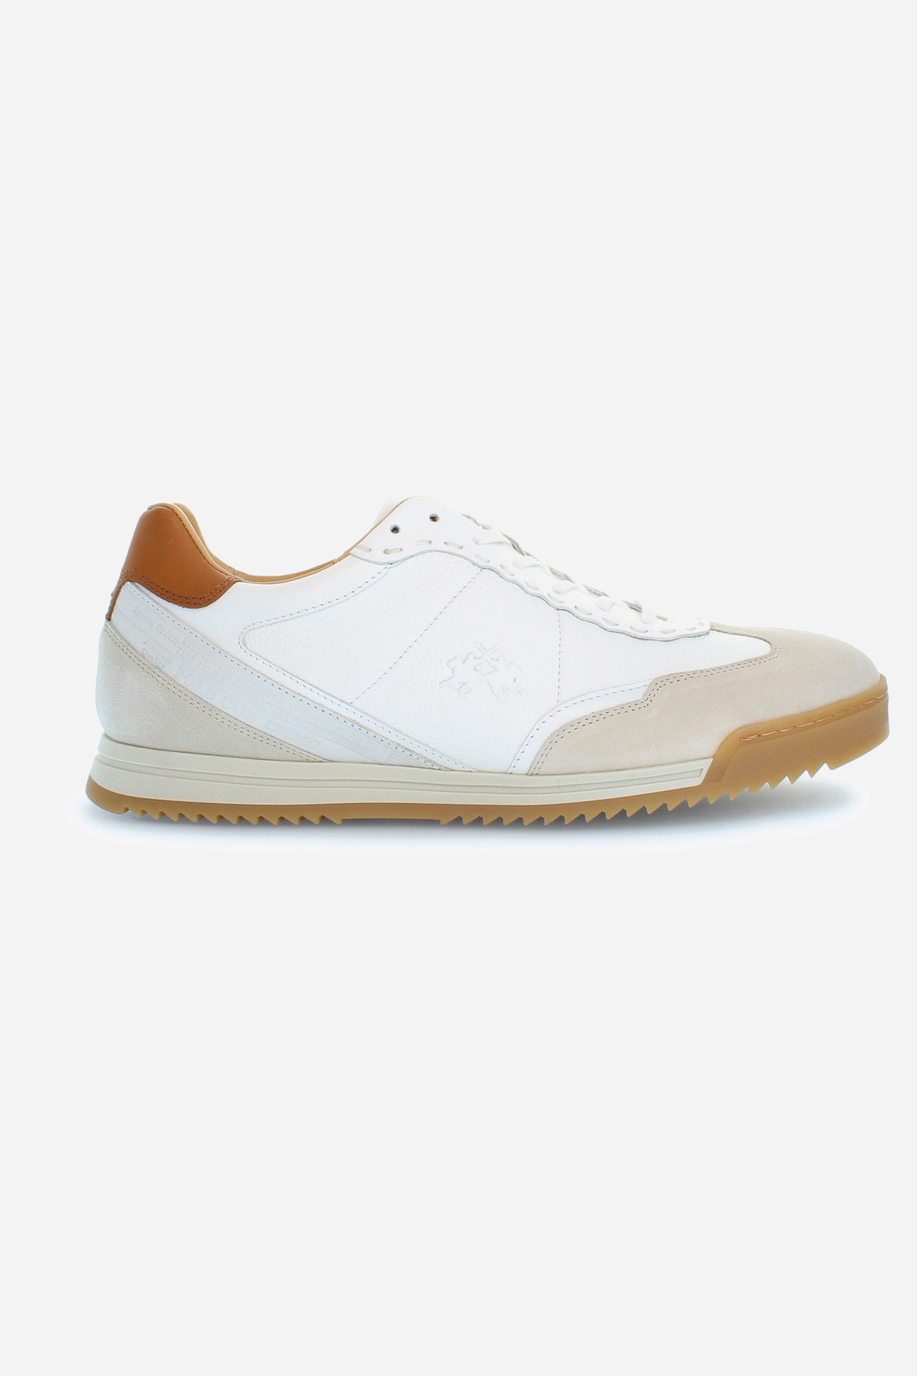 Classic men's trainers in leather - Man shoes | La Martina - Official Online Shop